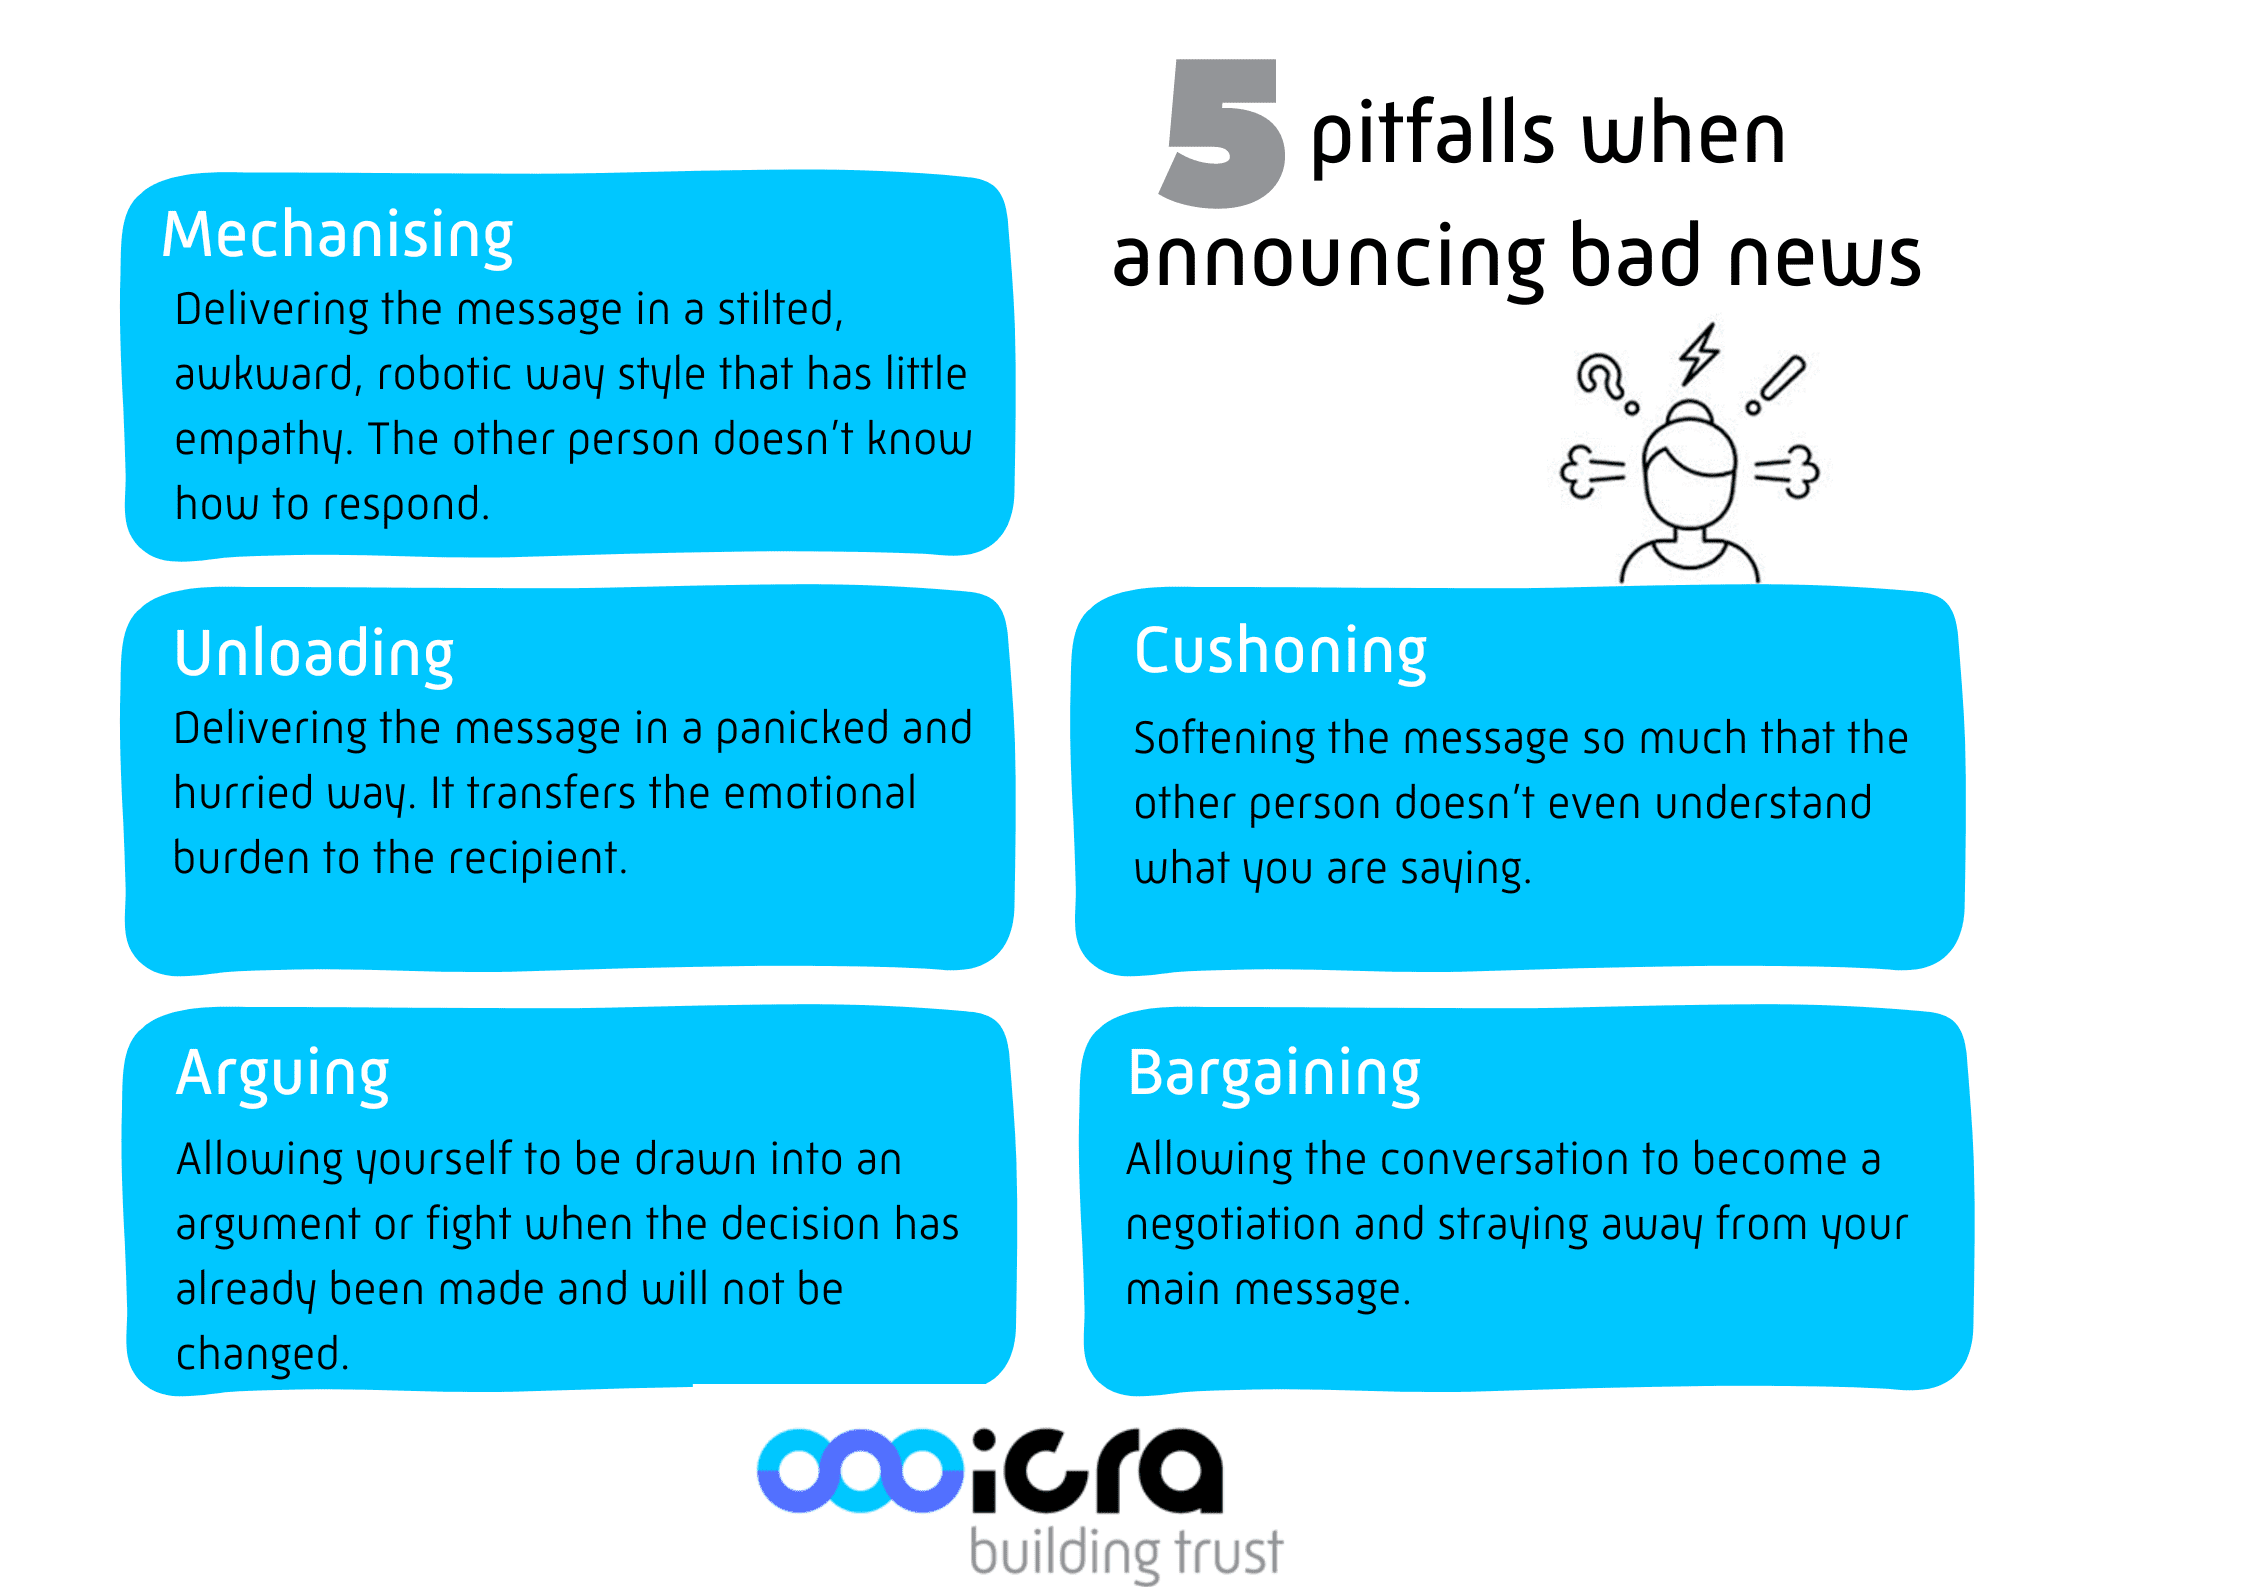 The 5 pittfalls of bad news announcement